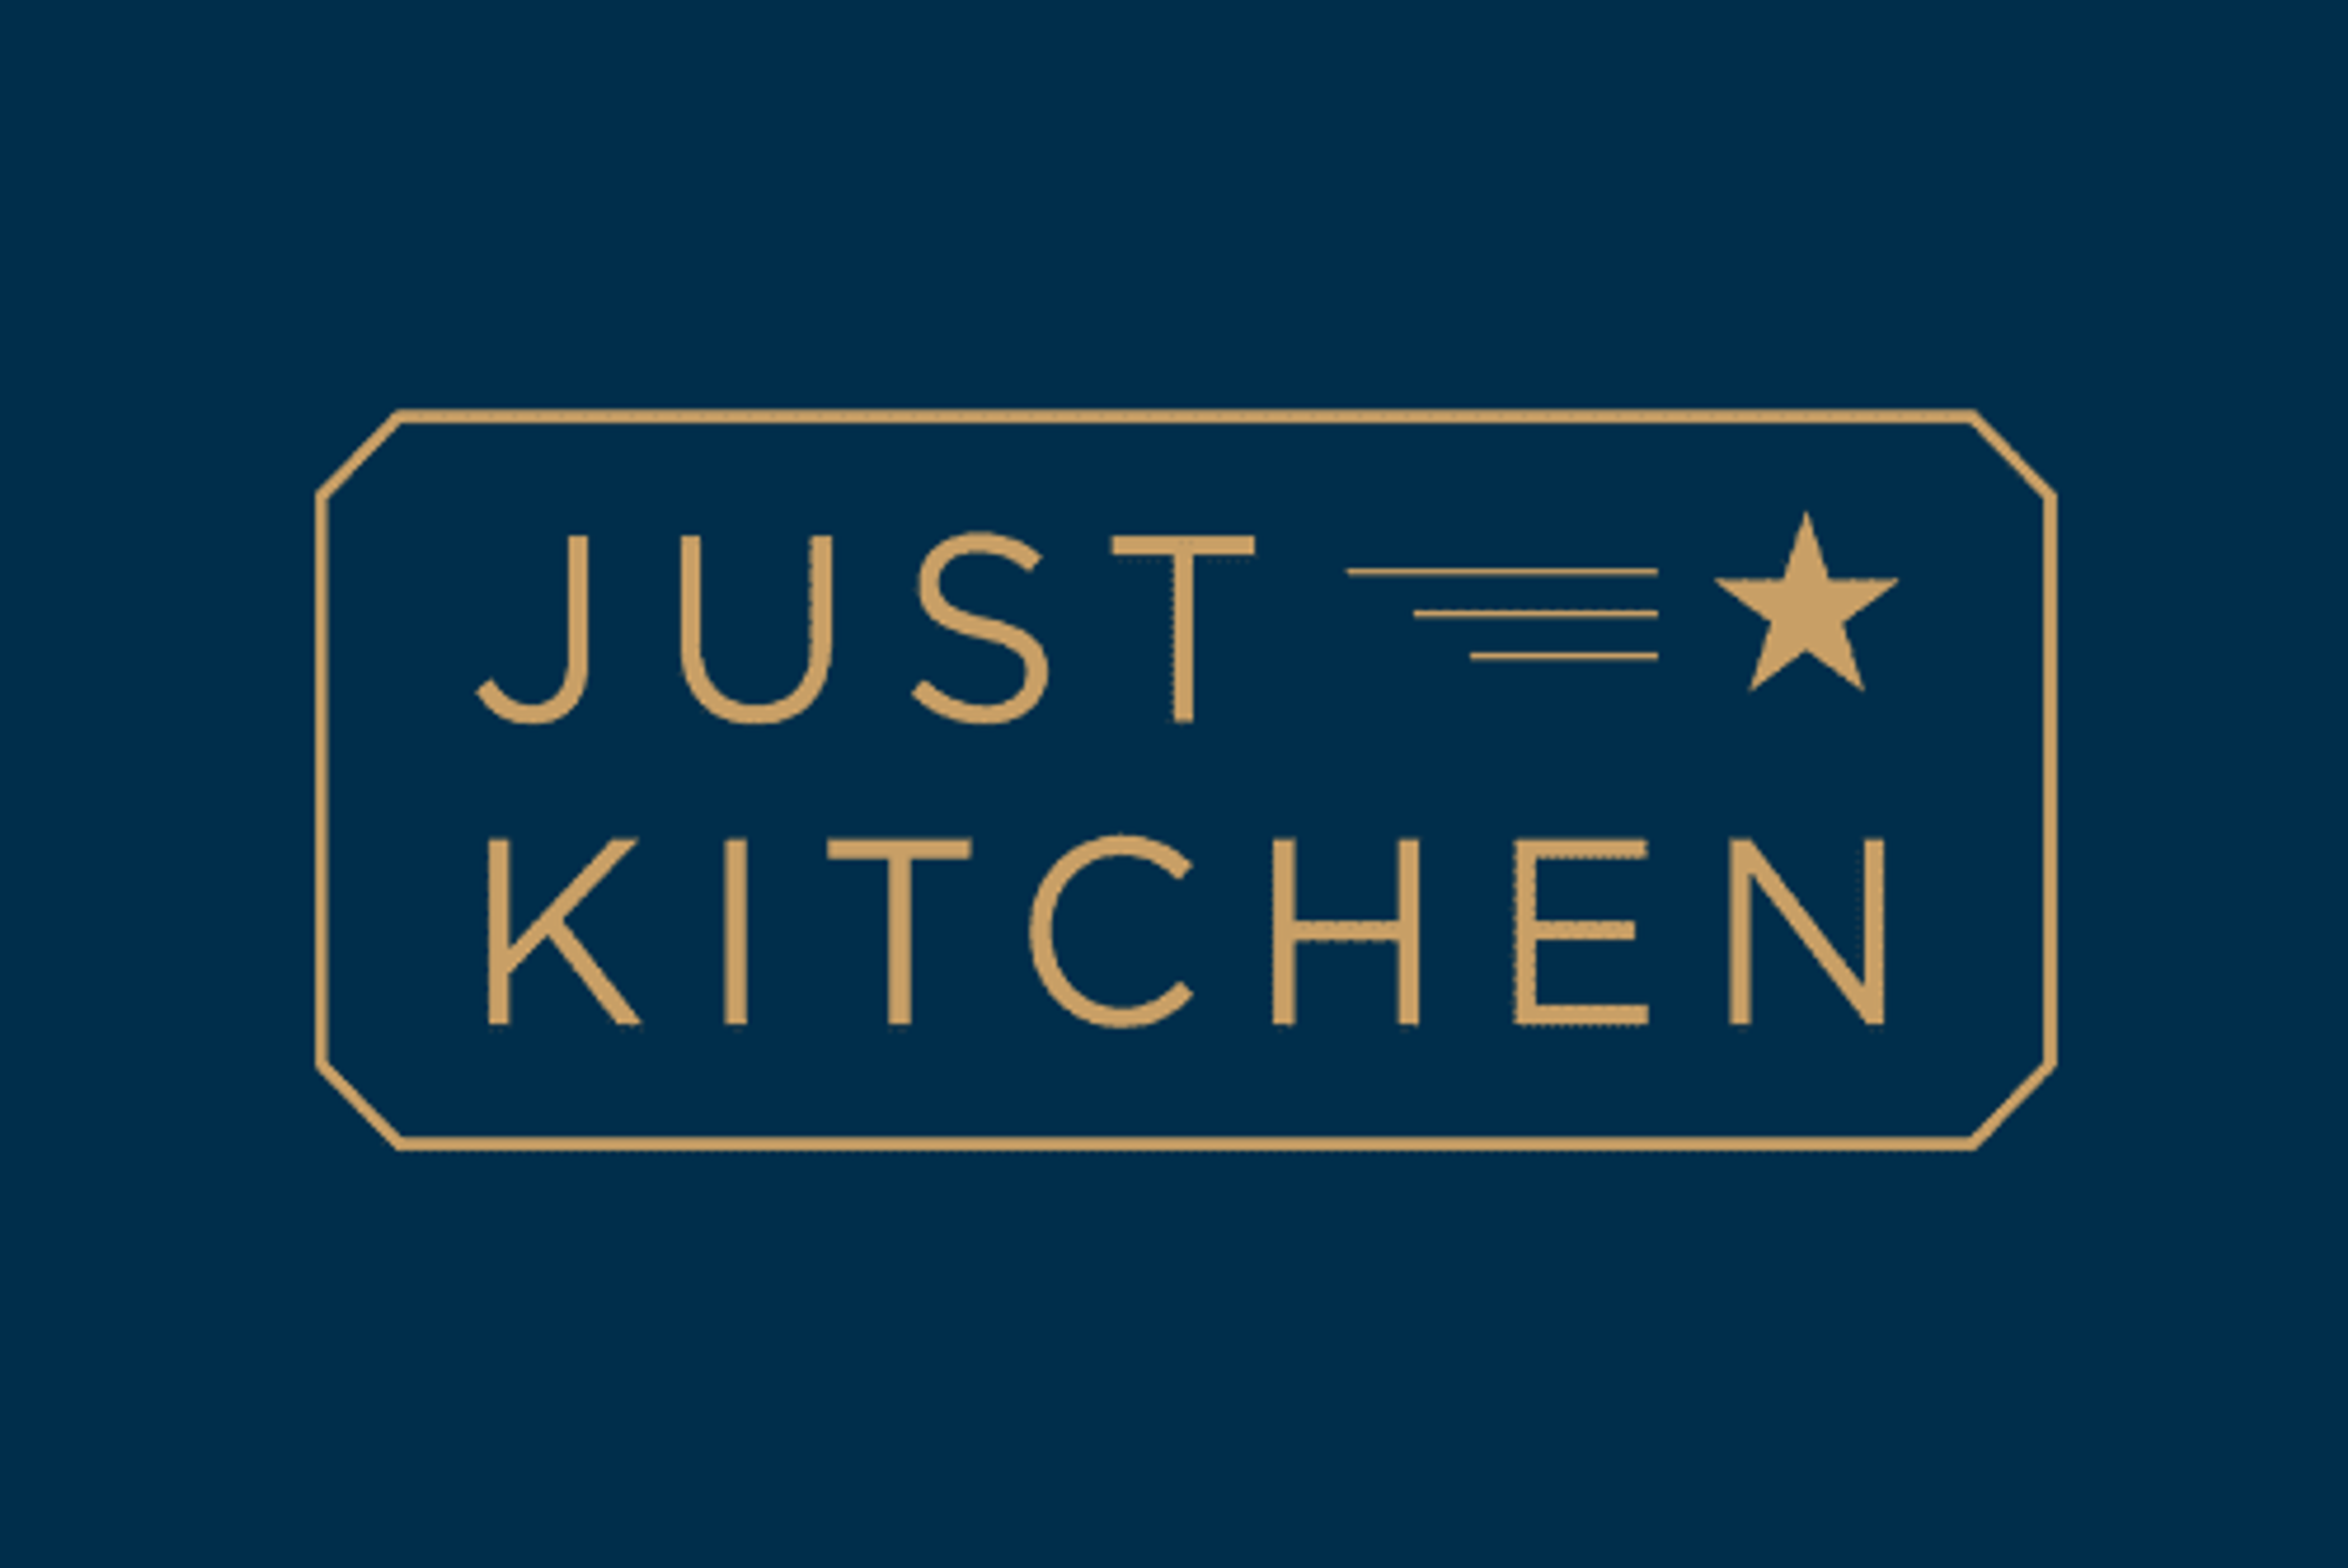 JustKitchen Announces Opening of Second Hong Kong Location and Sanchong Ghost Kitchen in Taiwan